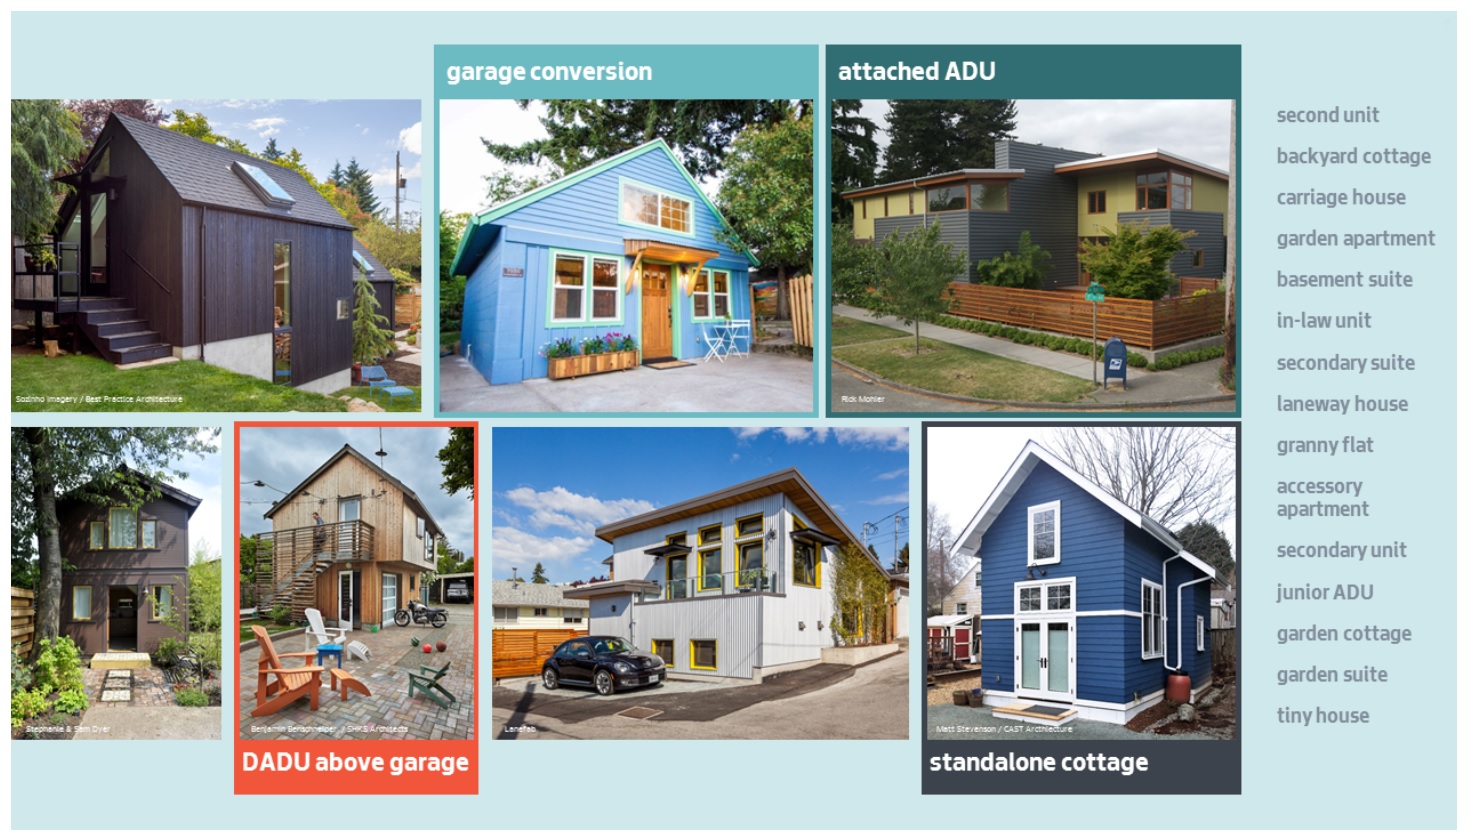 ADUniverse: Evaluating the Feasibility of (Affordable) Accessory Dwelling Units in Seattle